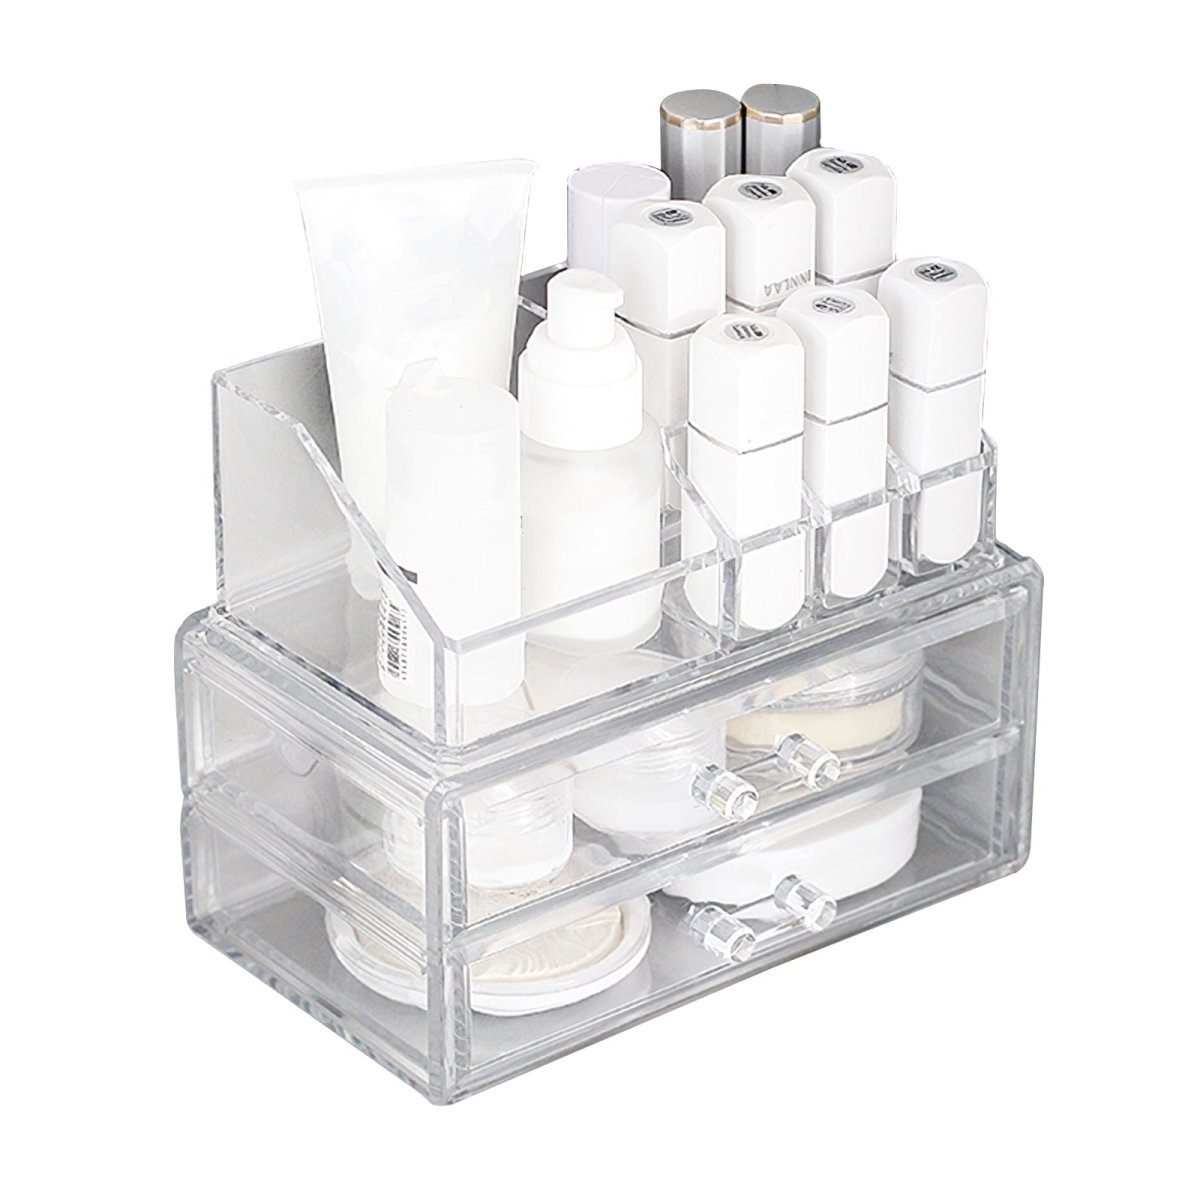 Makeup Collection Organizer Mini Size w/2 drawers (1063) - GreenLife-Beauty Supplies